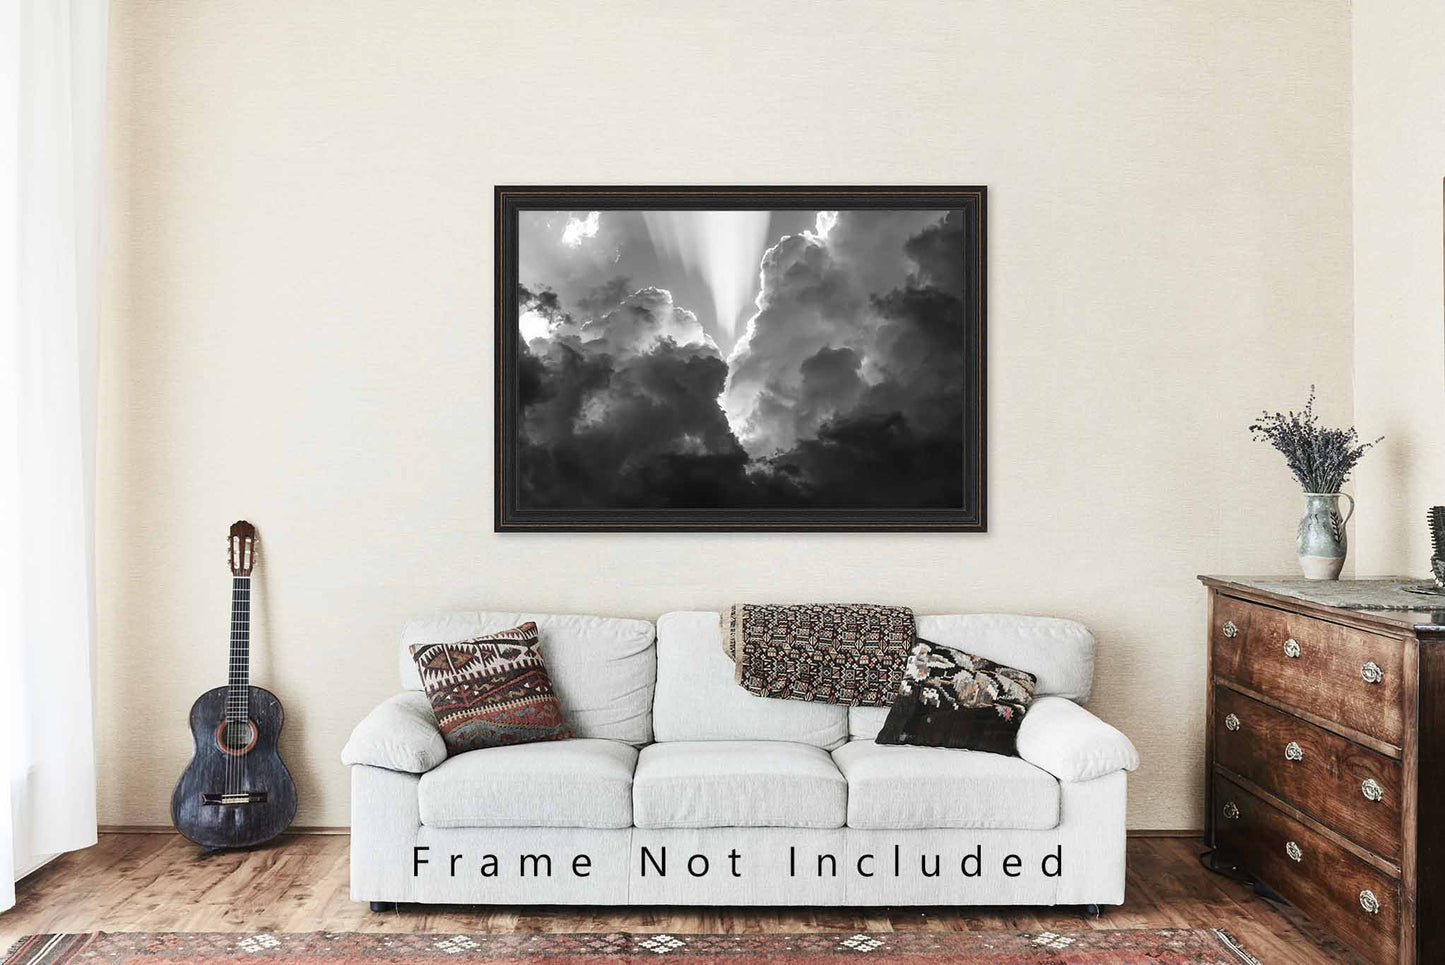 Inspirational Wall Art - Black and White Picture of Sunbeams from Storm Clouds in Oklahoma - Sky Photography Photo Print Artwork Decor